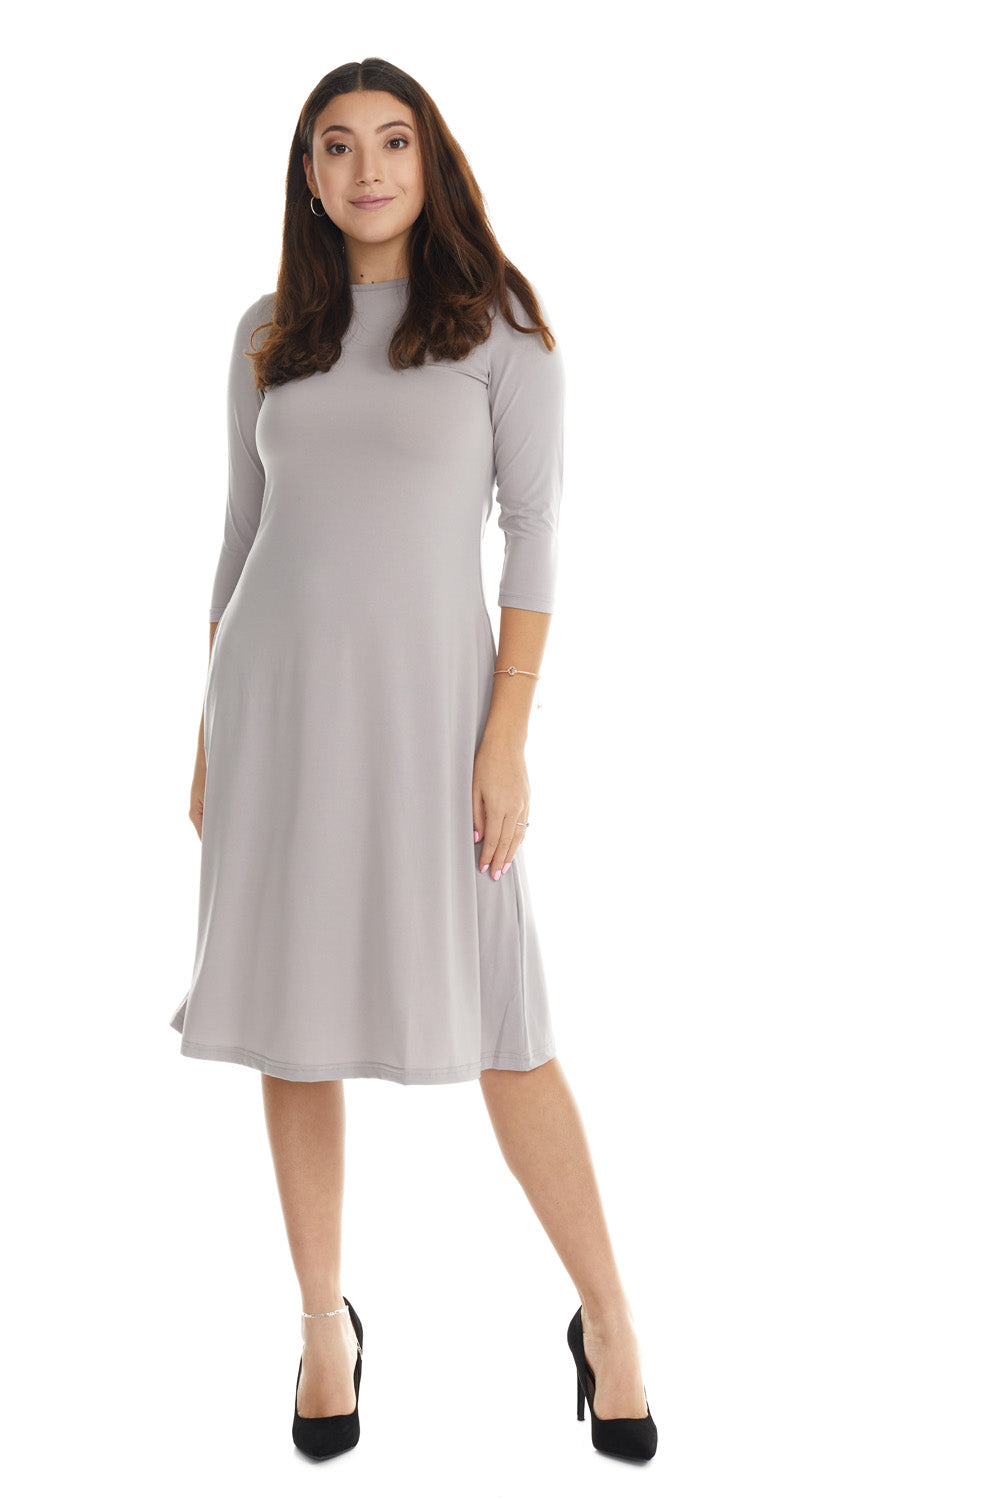 Esteez TAMMEE Dress - Womens Classic Fit and Flare Dress with pockets - POLAR GREY